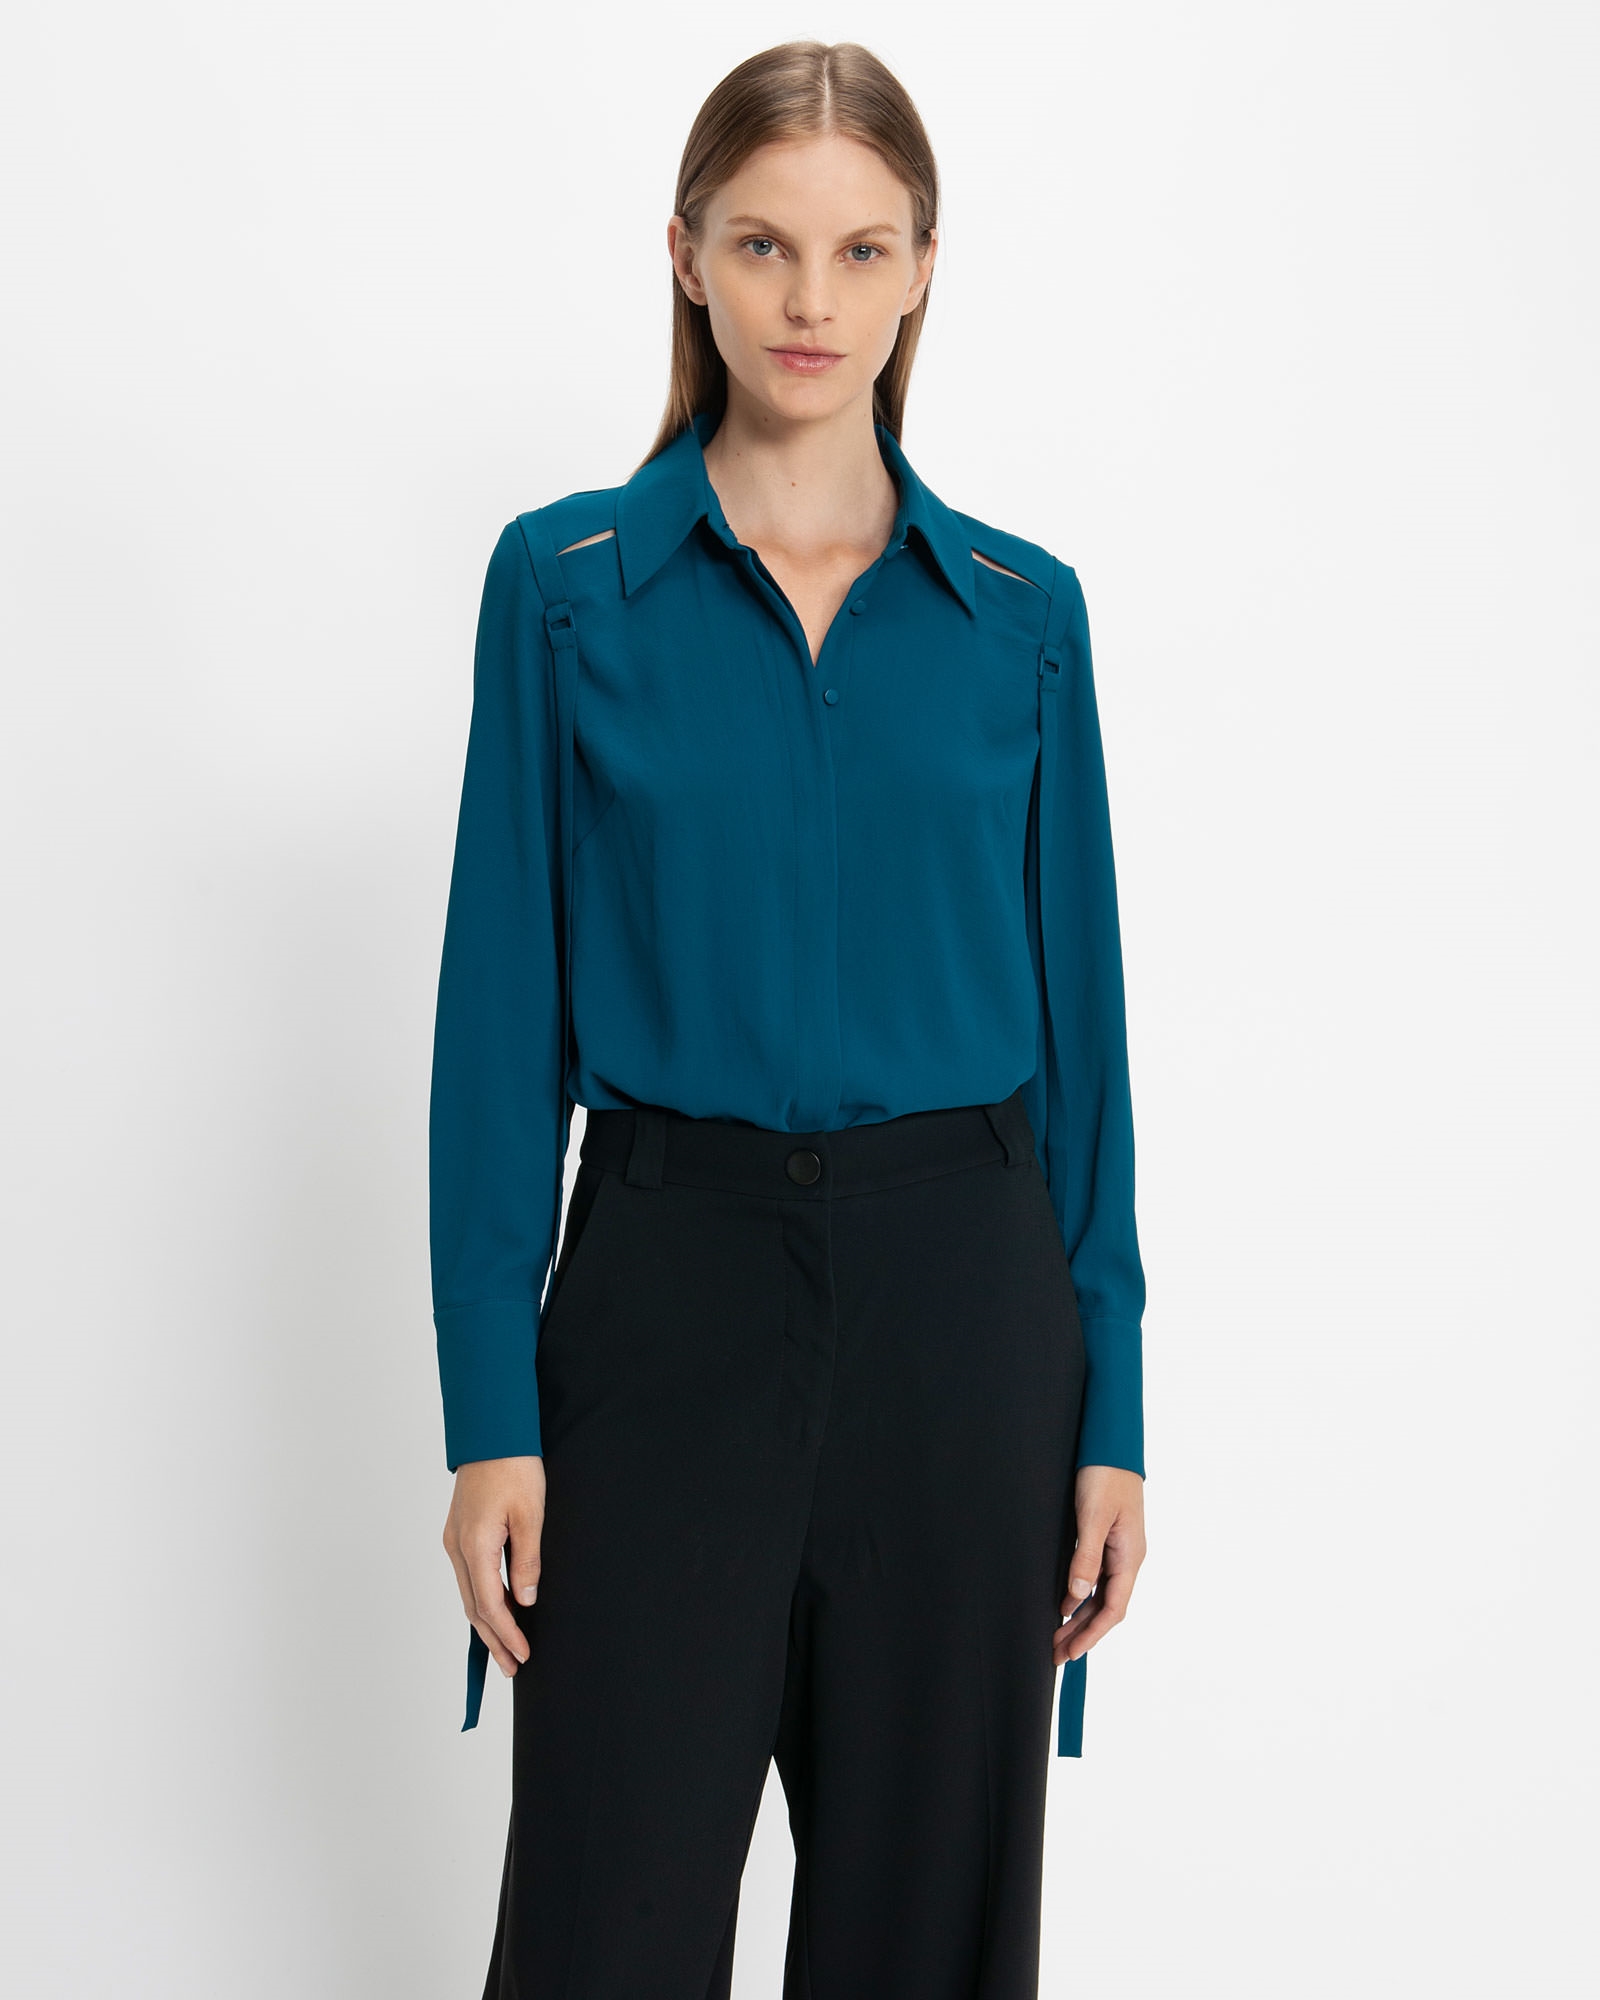 Soft Crepe Tie Detail Shirt | Buy Tops & Shirts Online - Cue